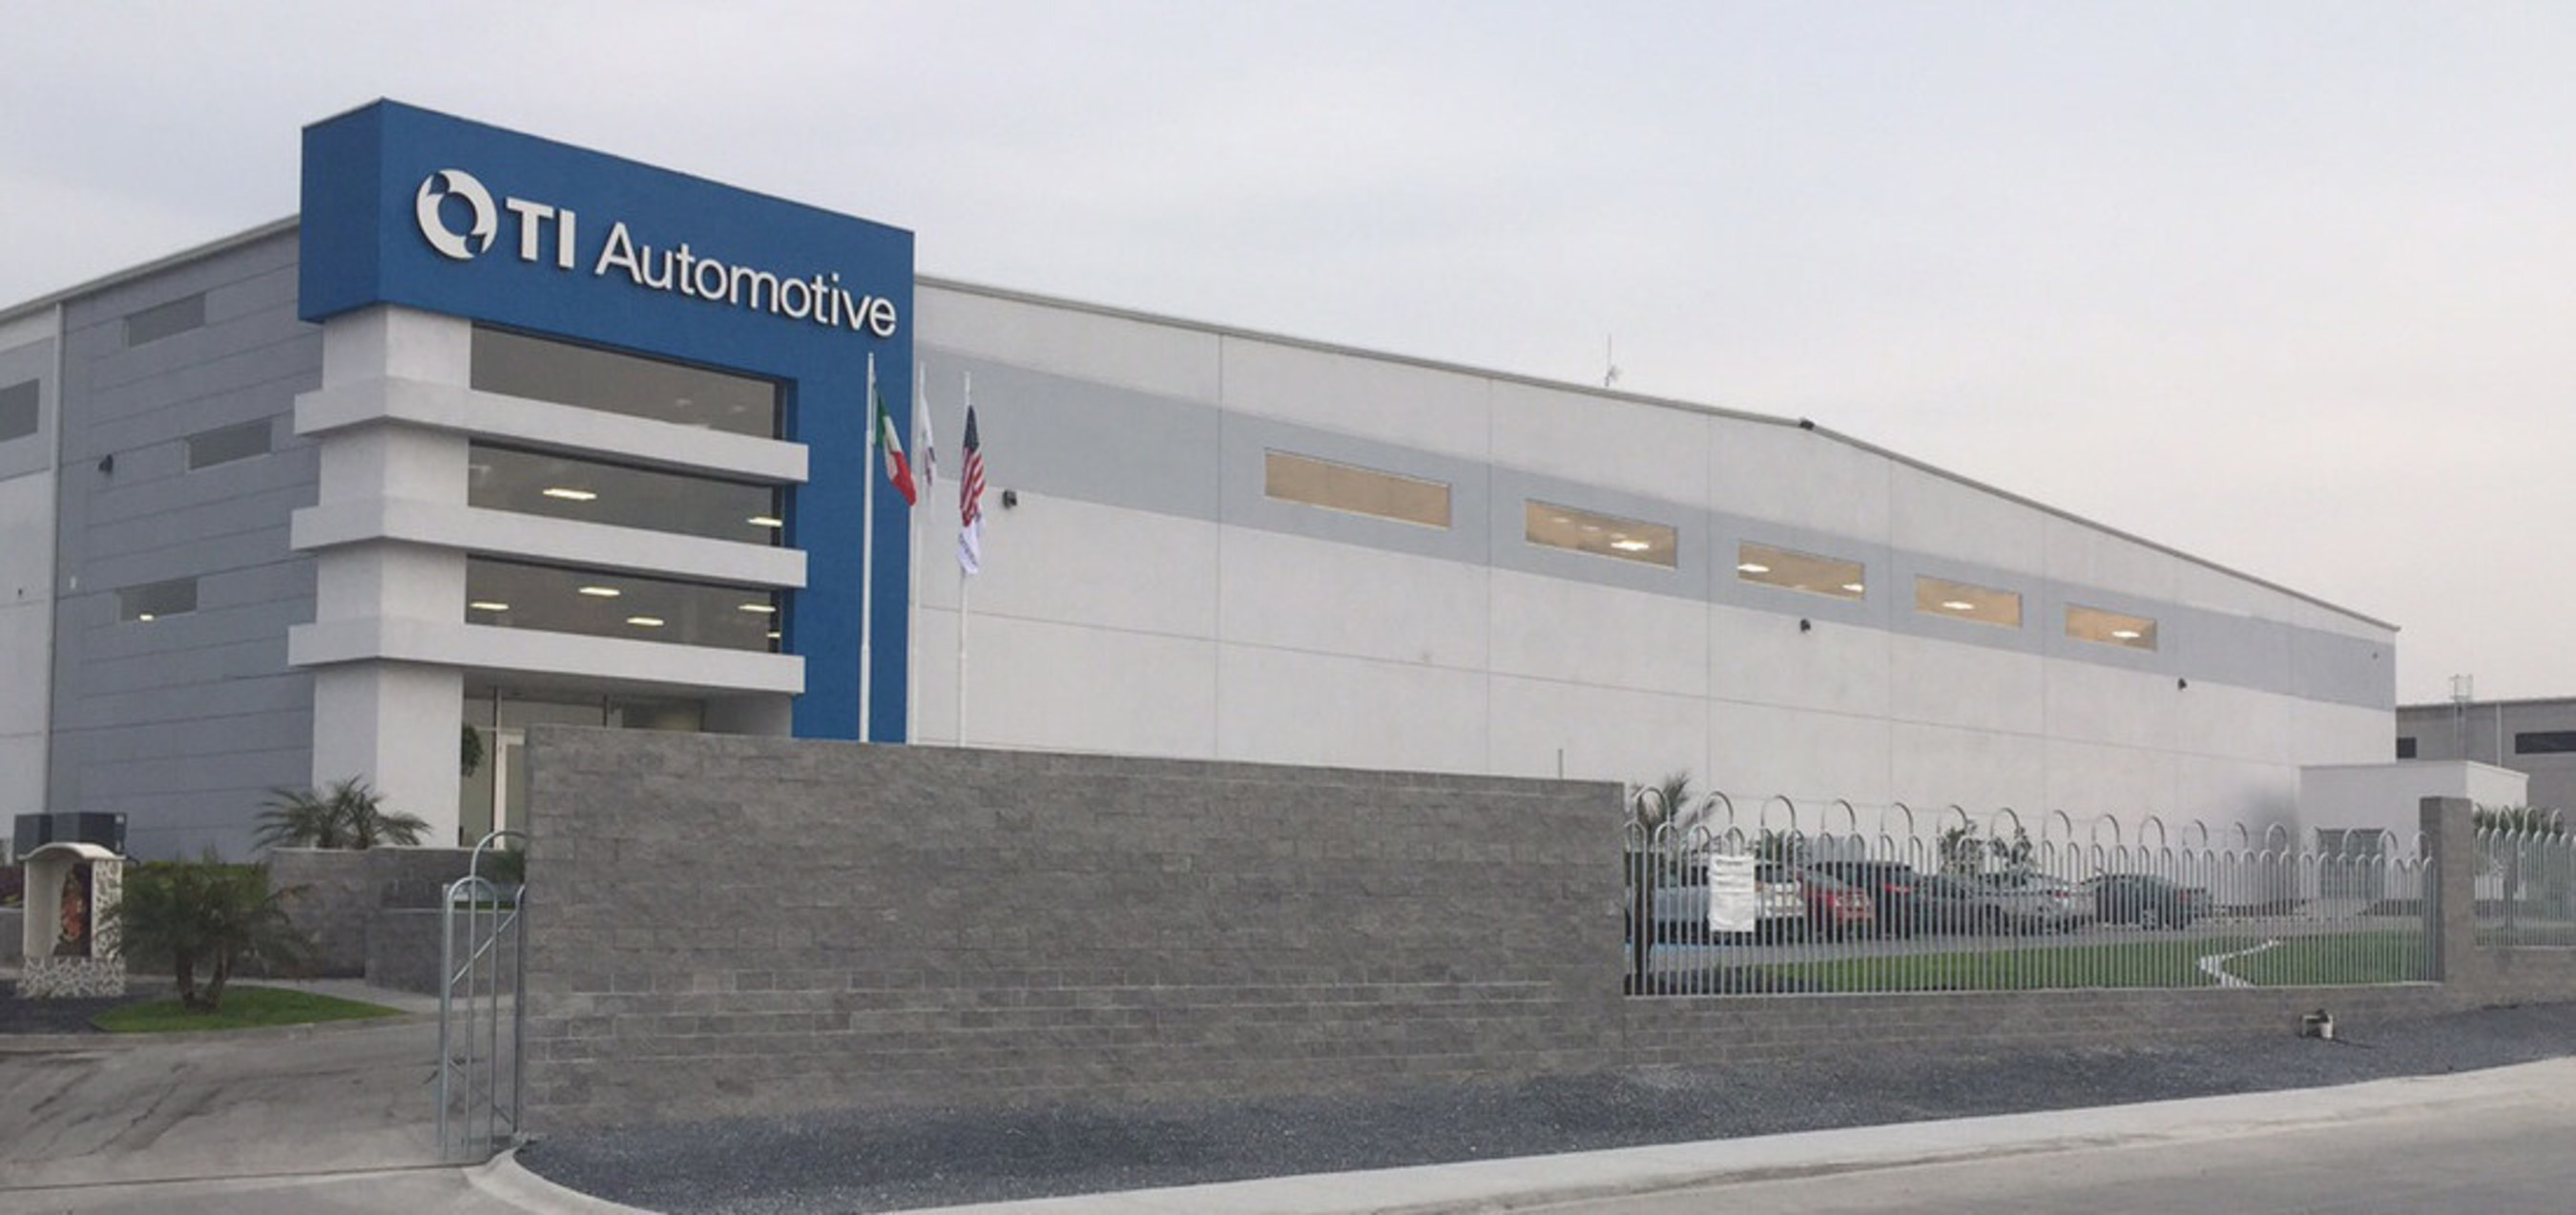 TI Automotive opened its newest production facility in Monterrey, Mexico on April 13, 2016. The facility will produce fluid carrying systems for Kia vehicles produced nearby.